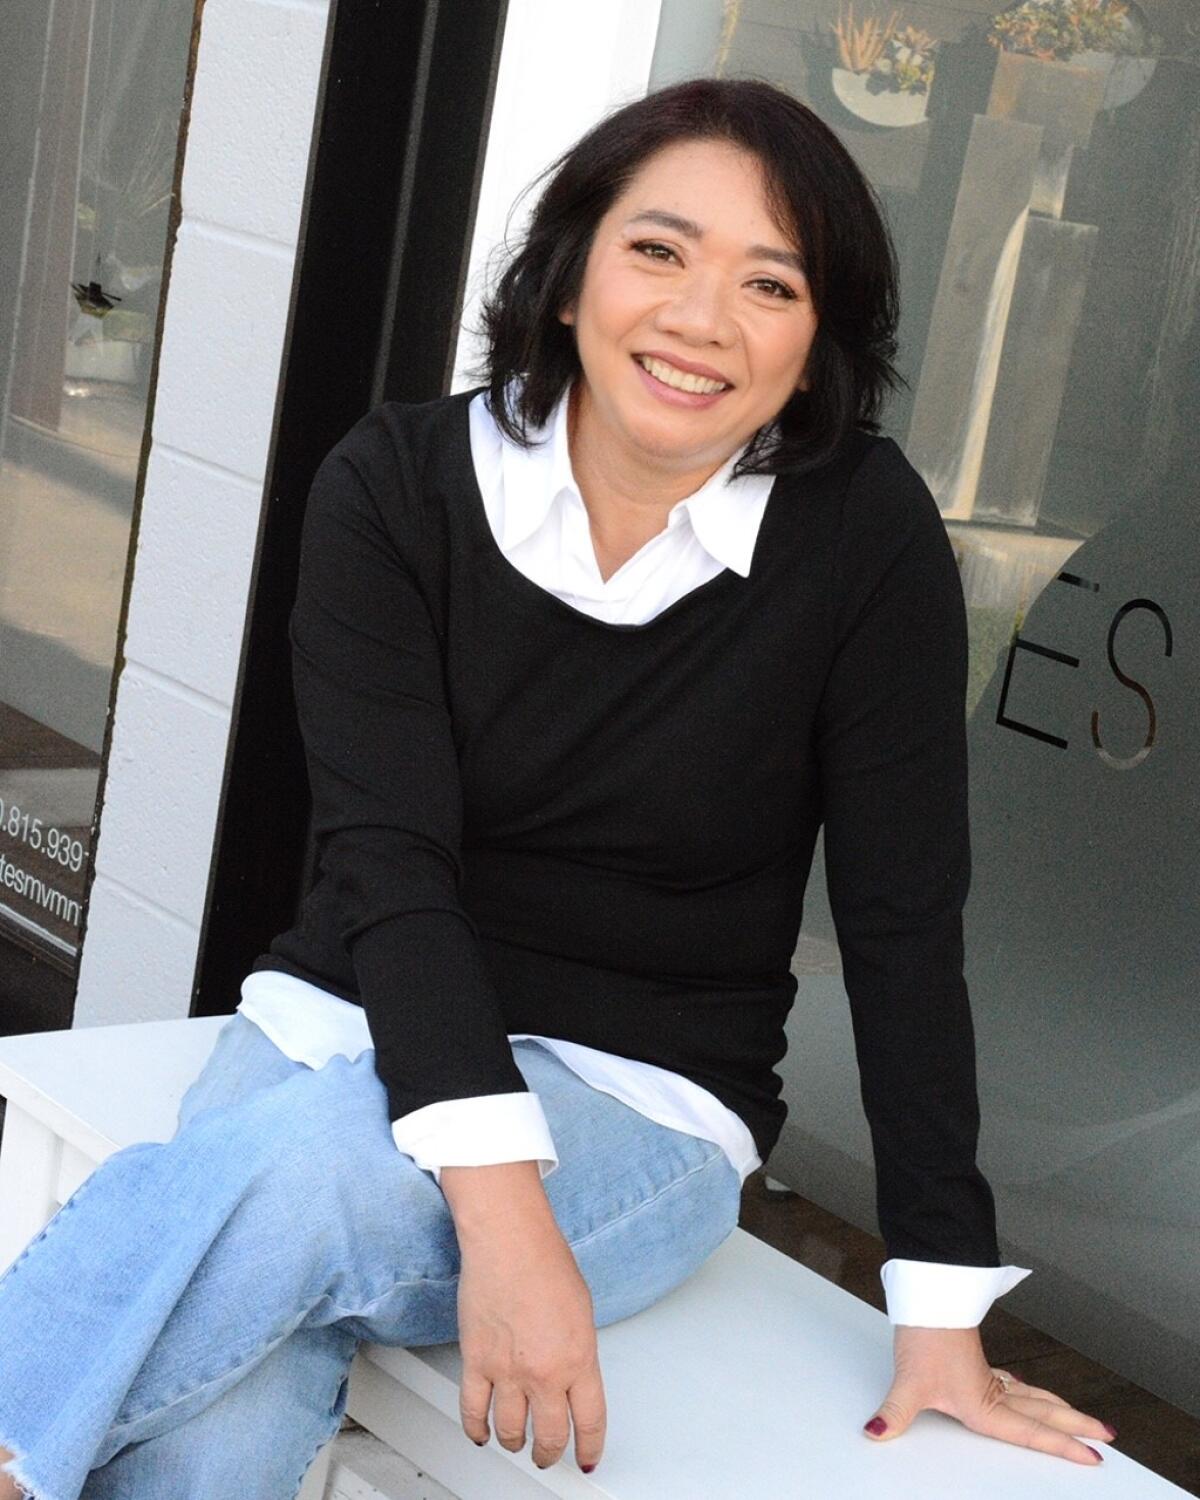 Author Pam Fong